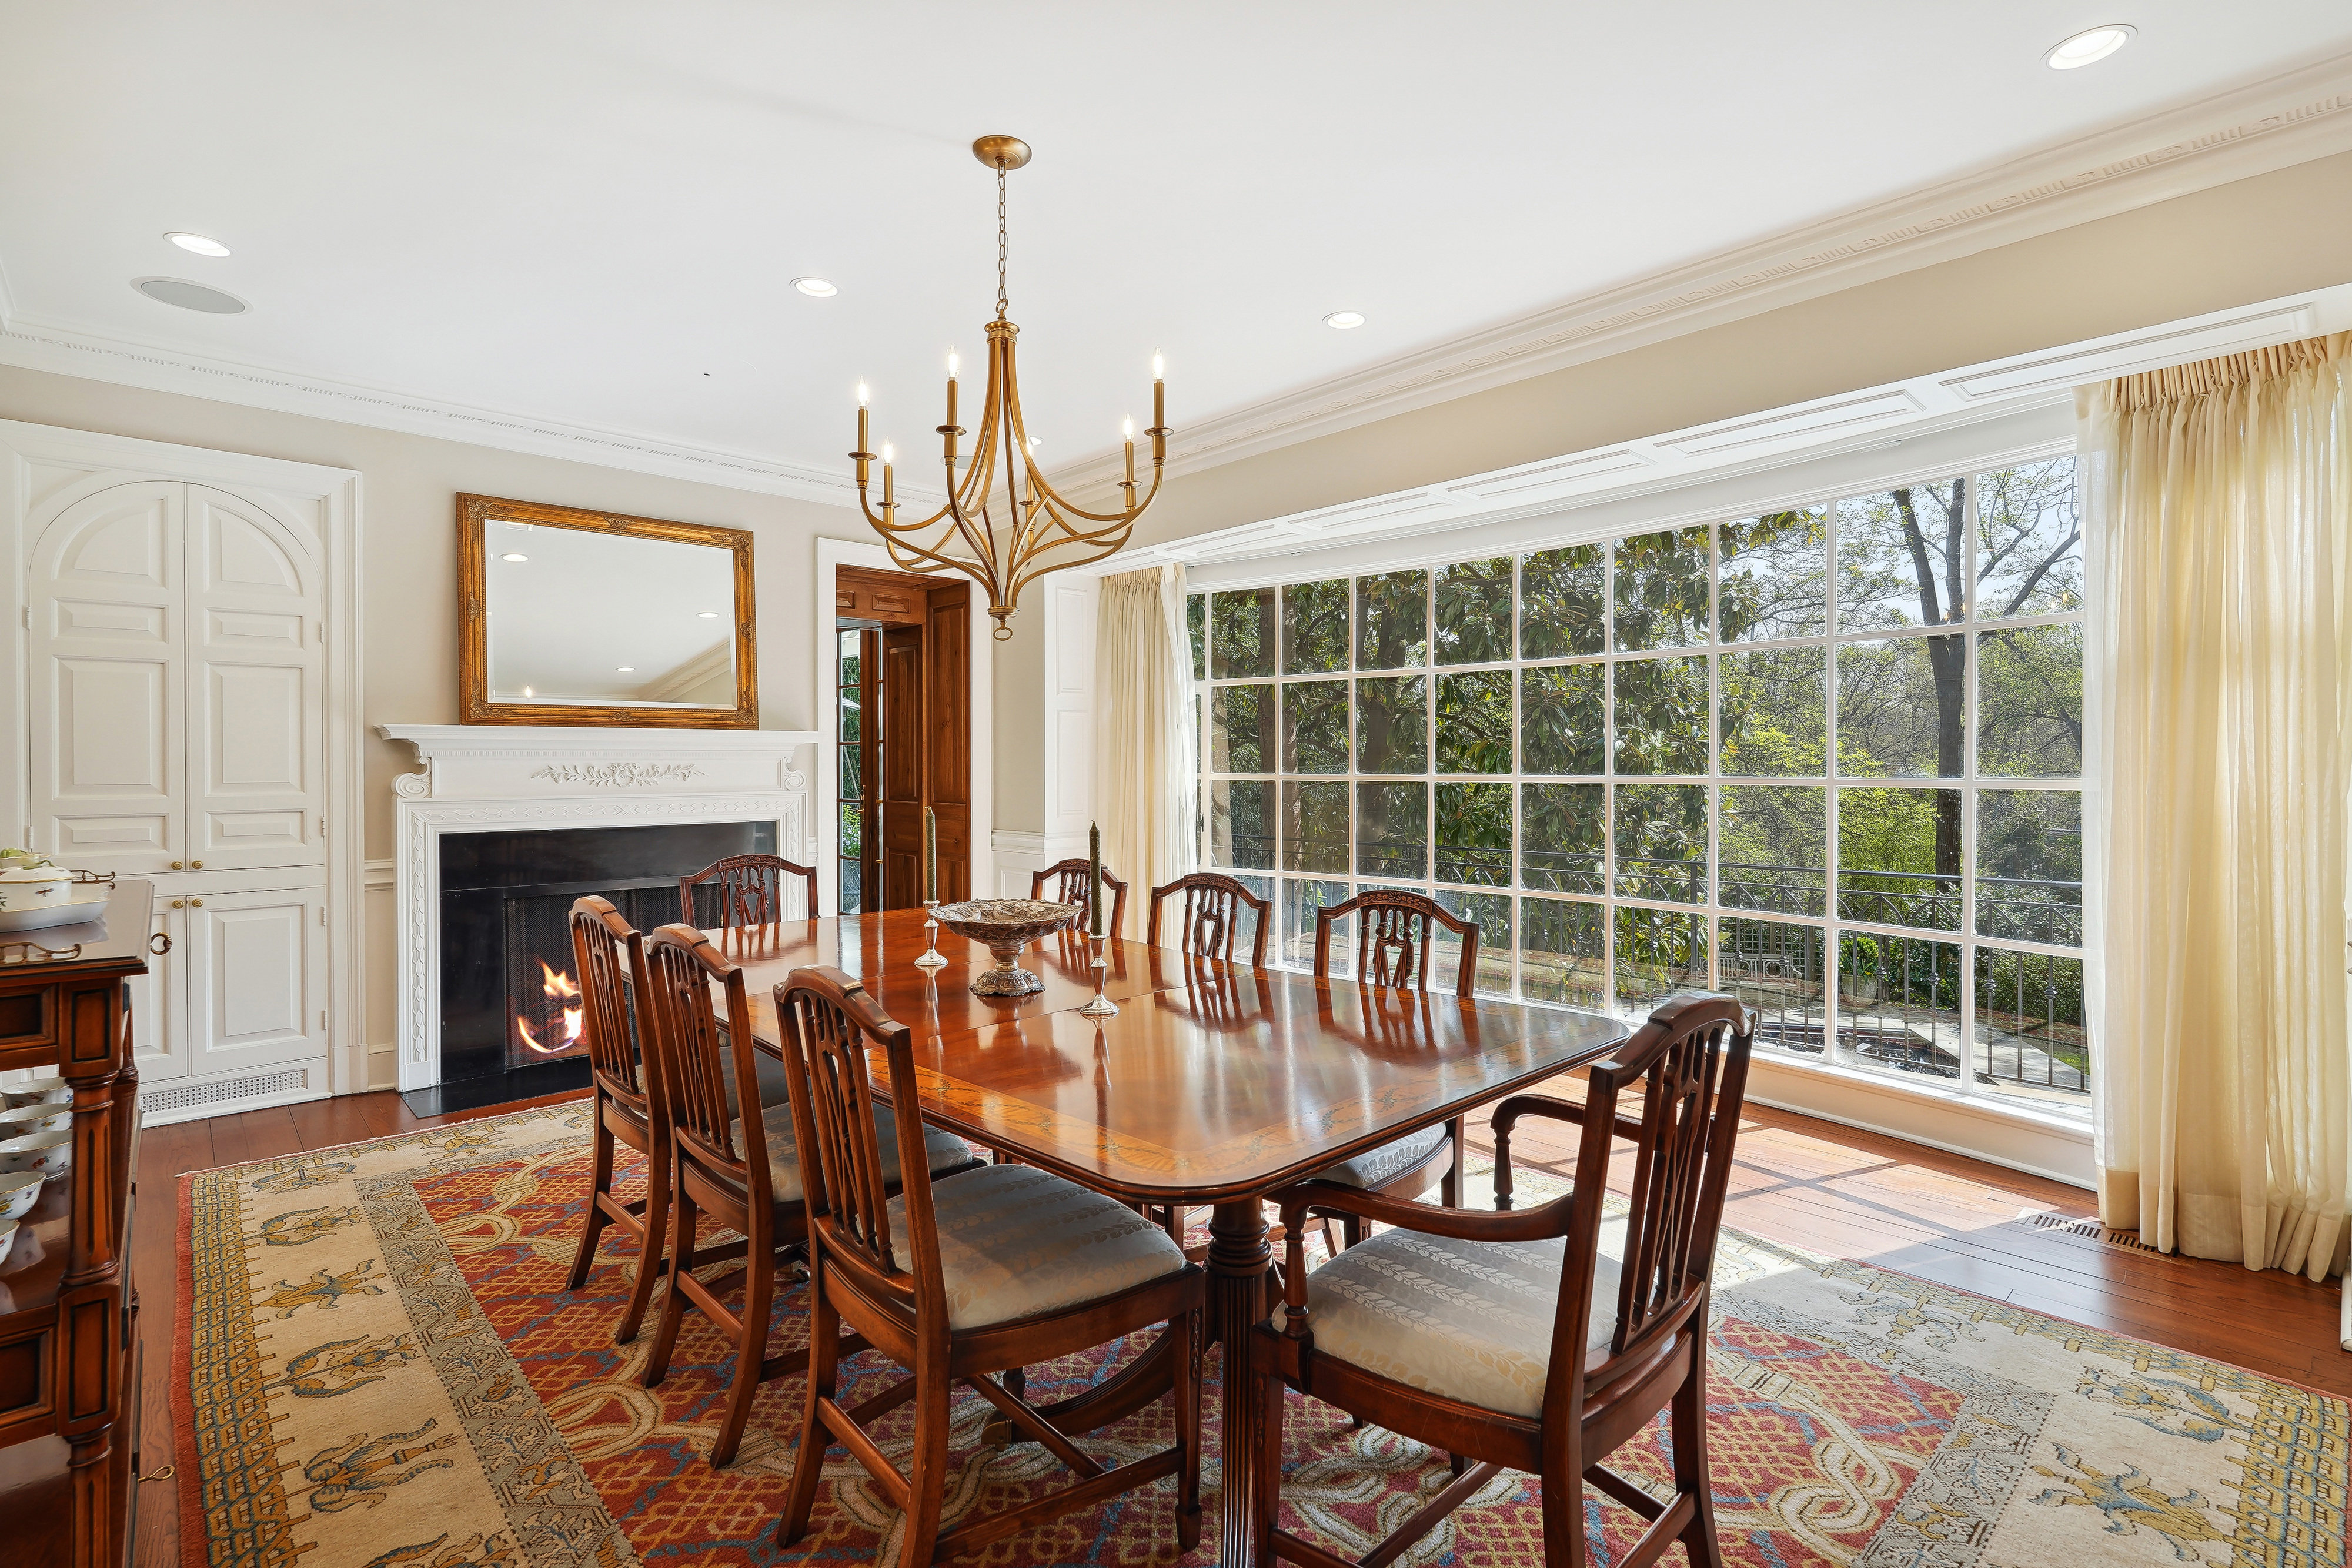 1941 colonial in d.c. on the market for nearly $7 million